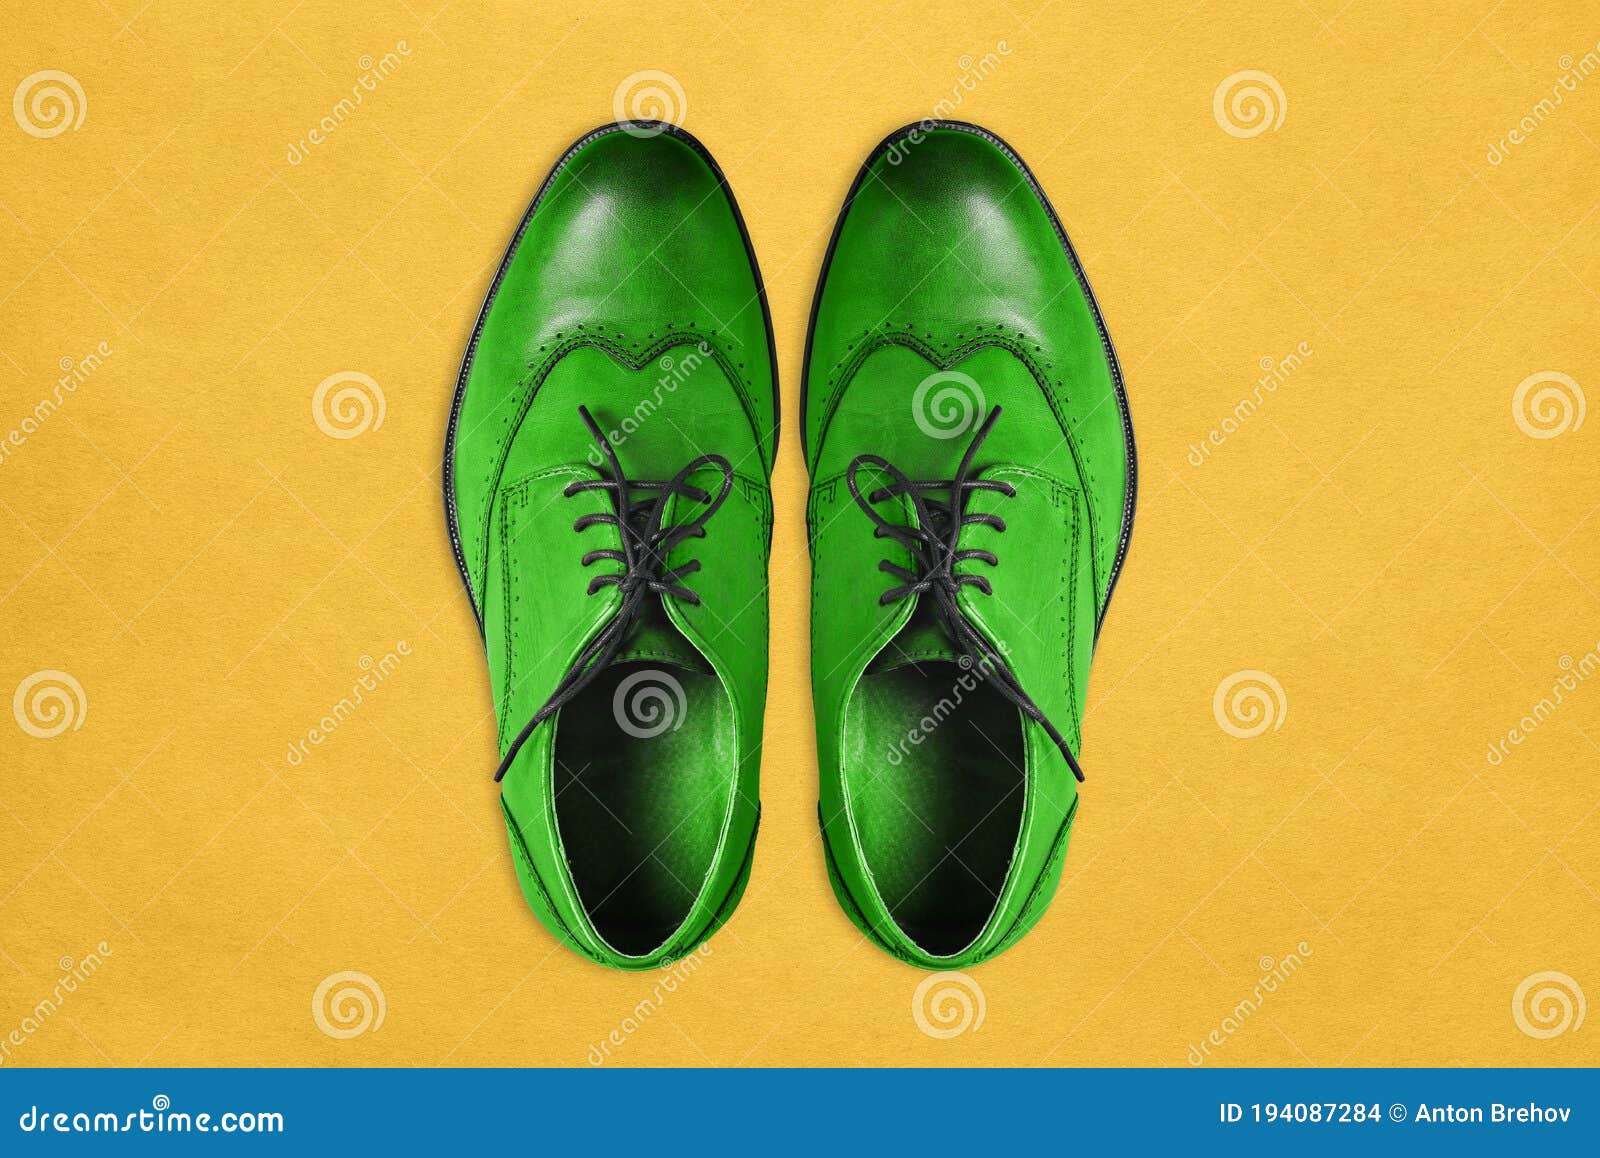 Green Men`s Shoes Made of Genuine Leather on a Yellow Background ...